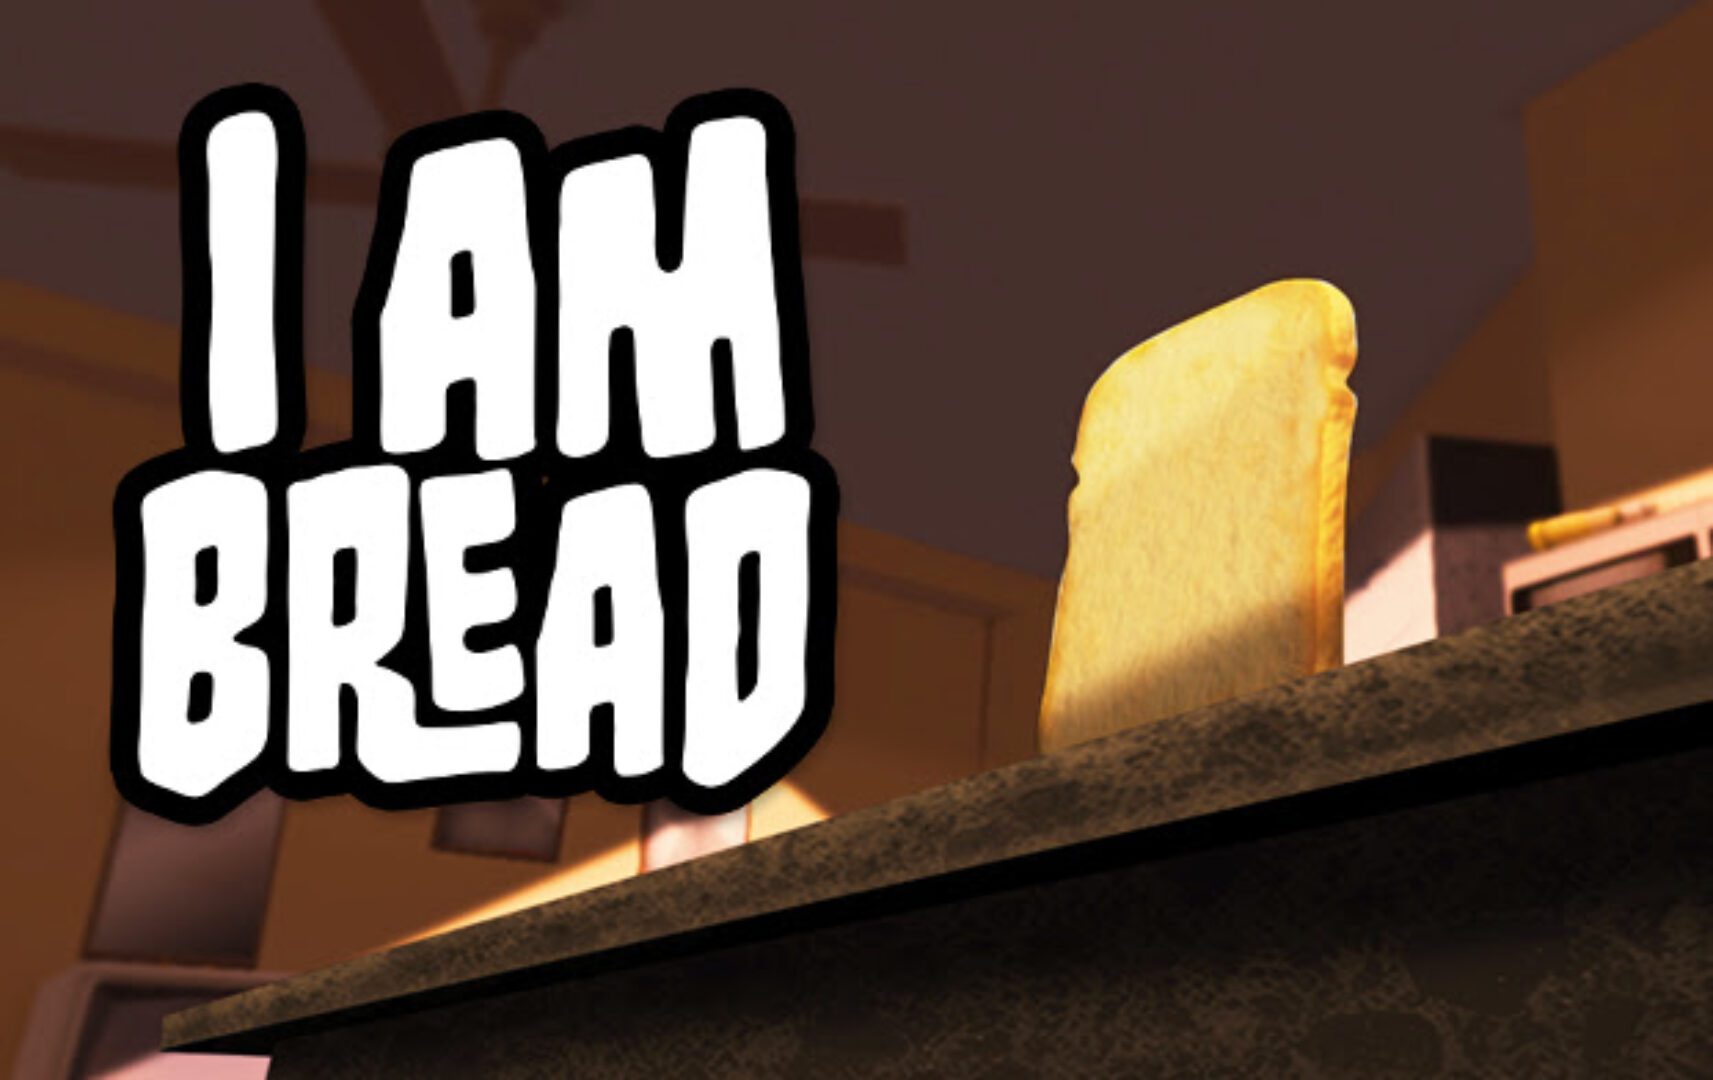 I Am Bread makes its way to PS4